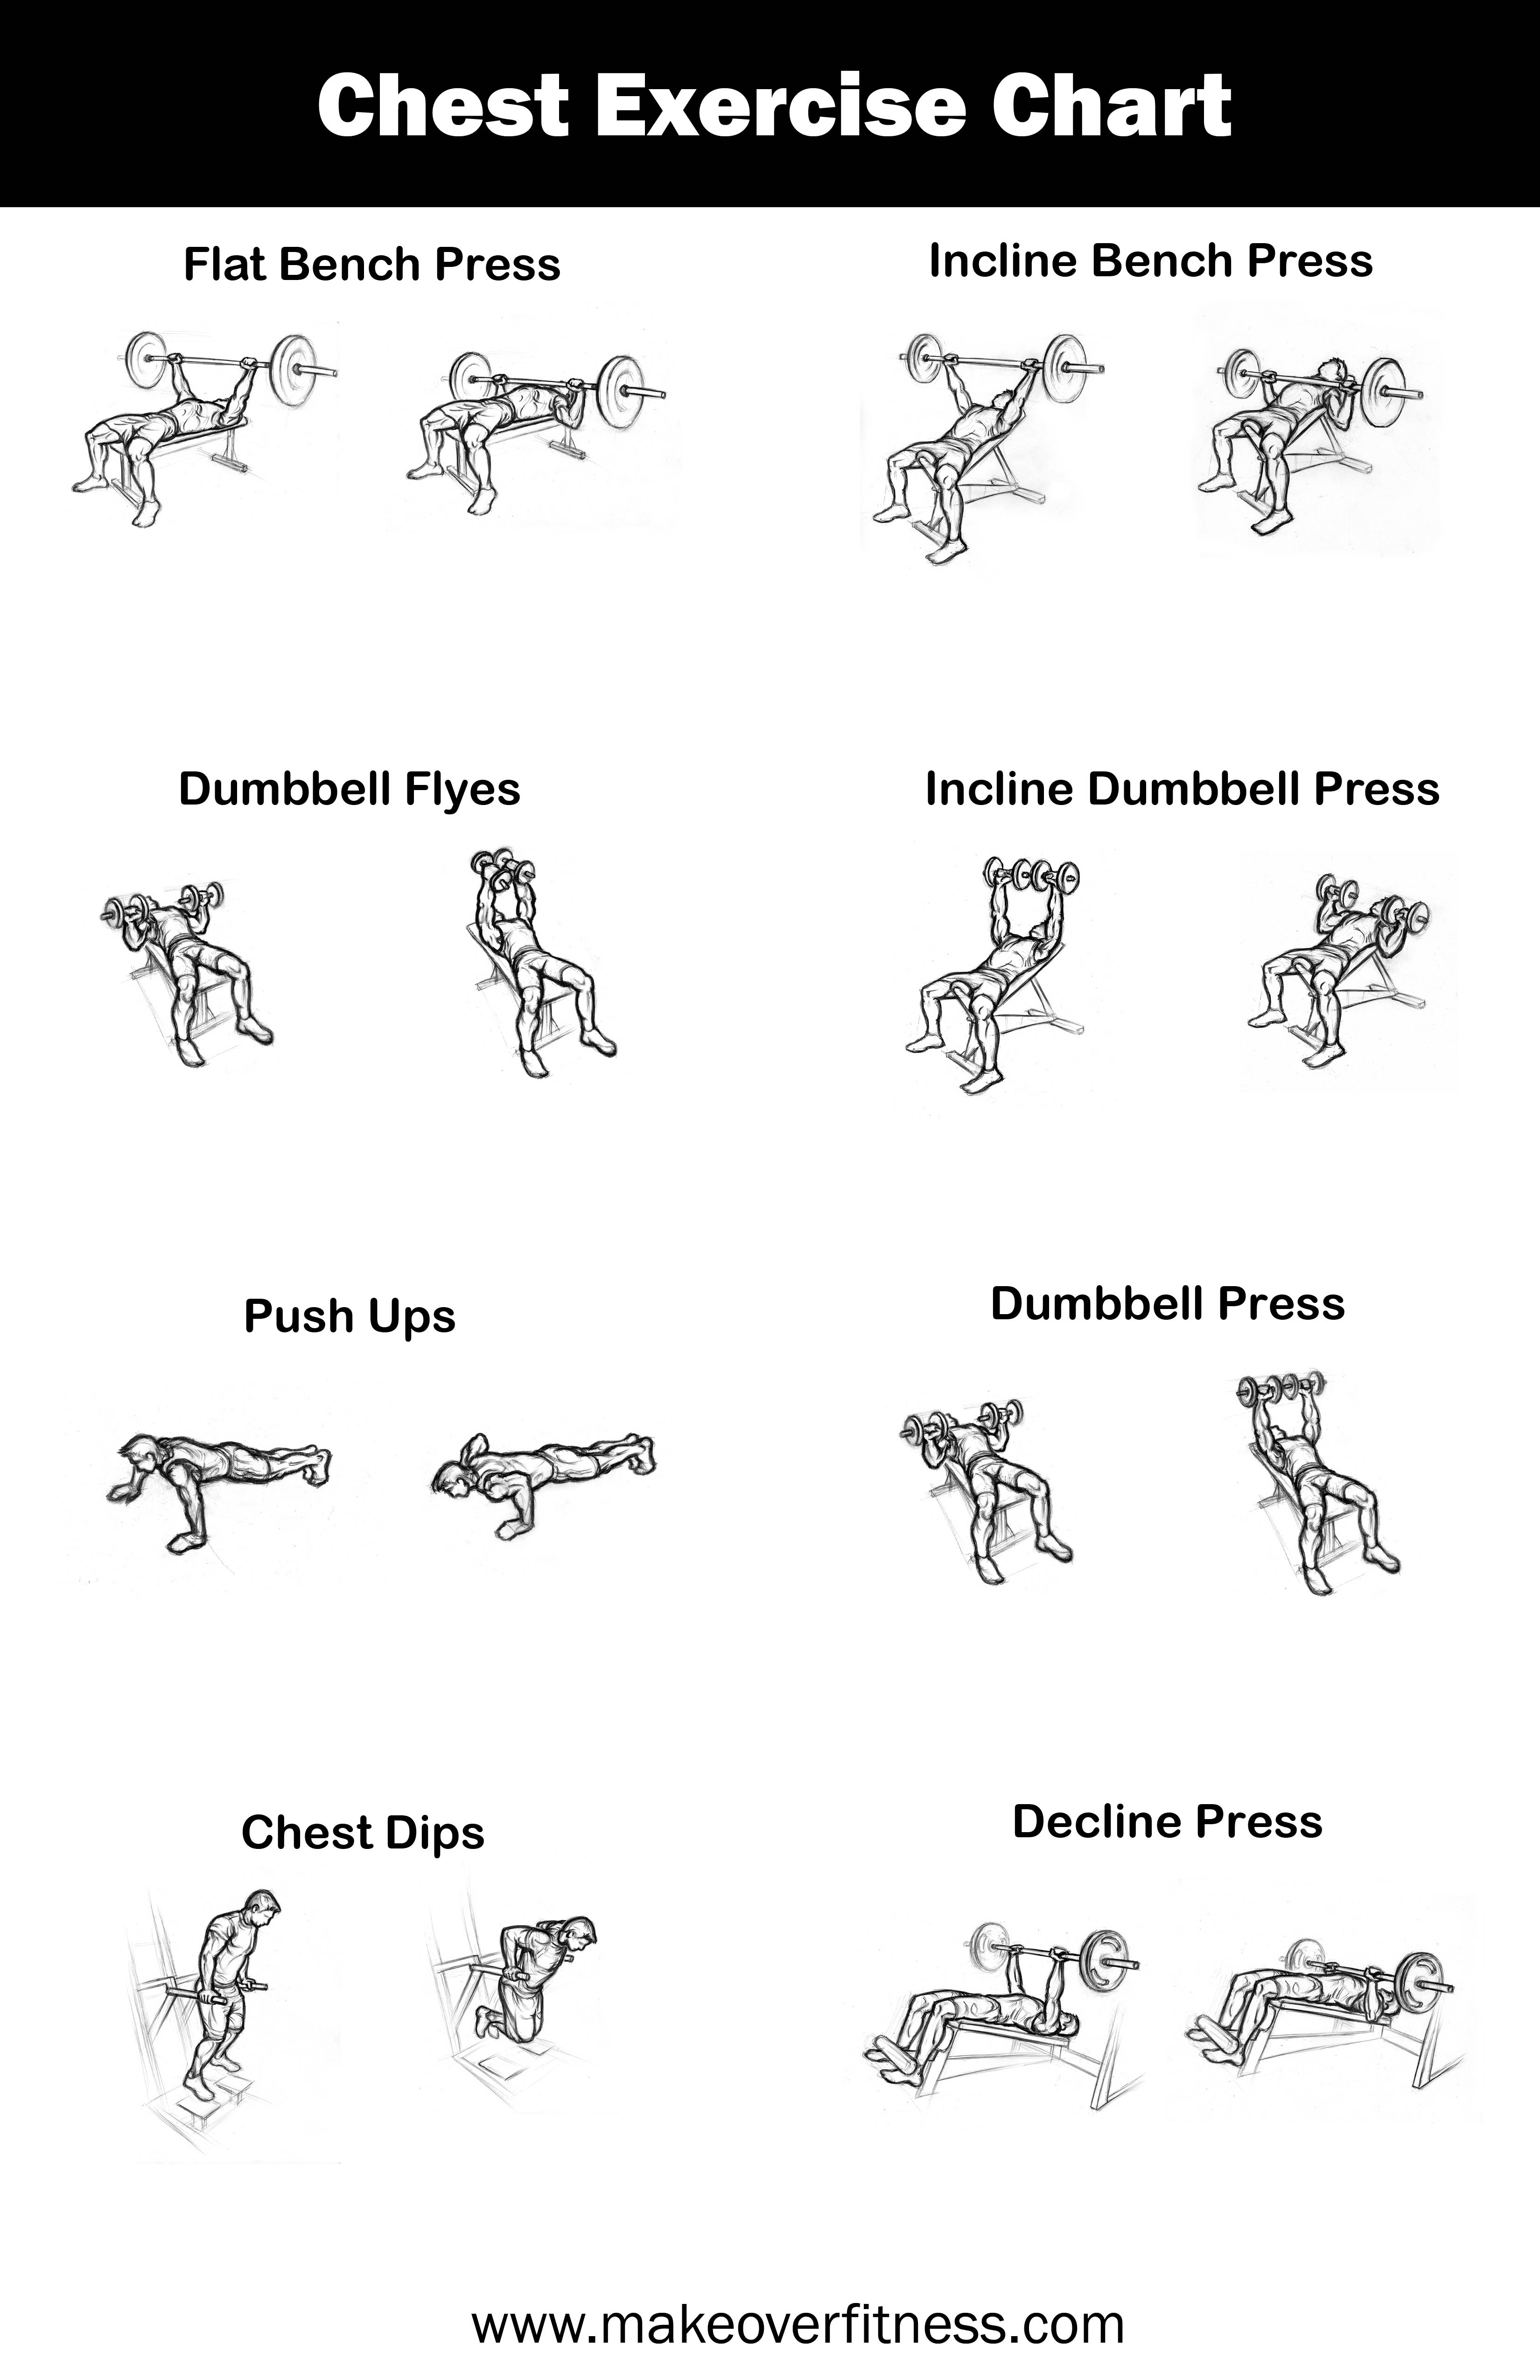 An illustrated chart of the best chest exercises